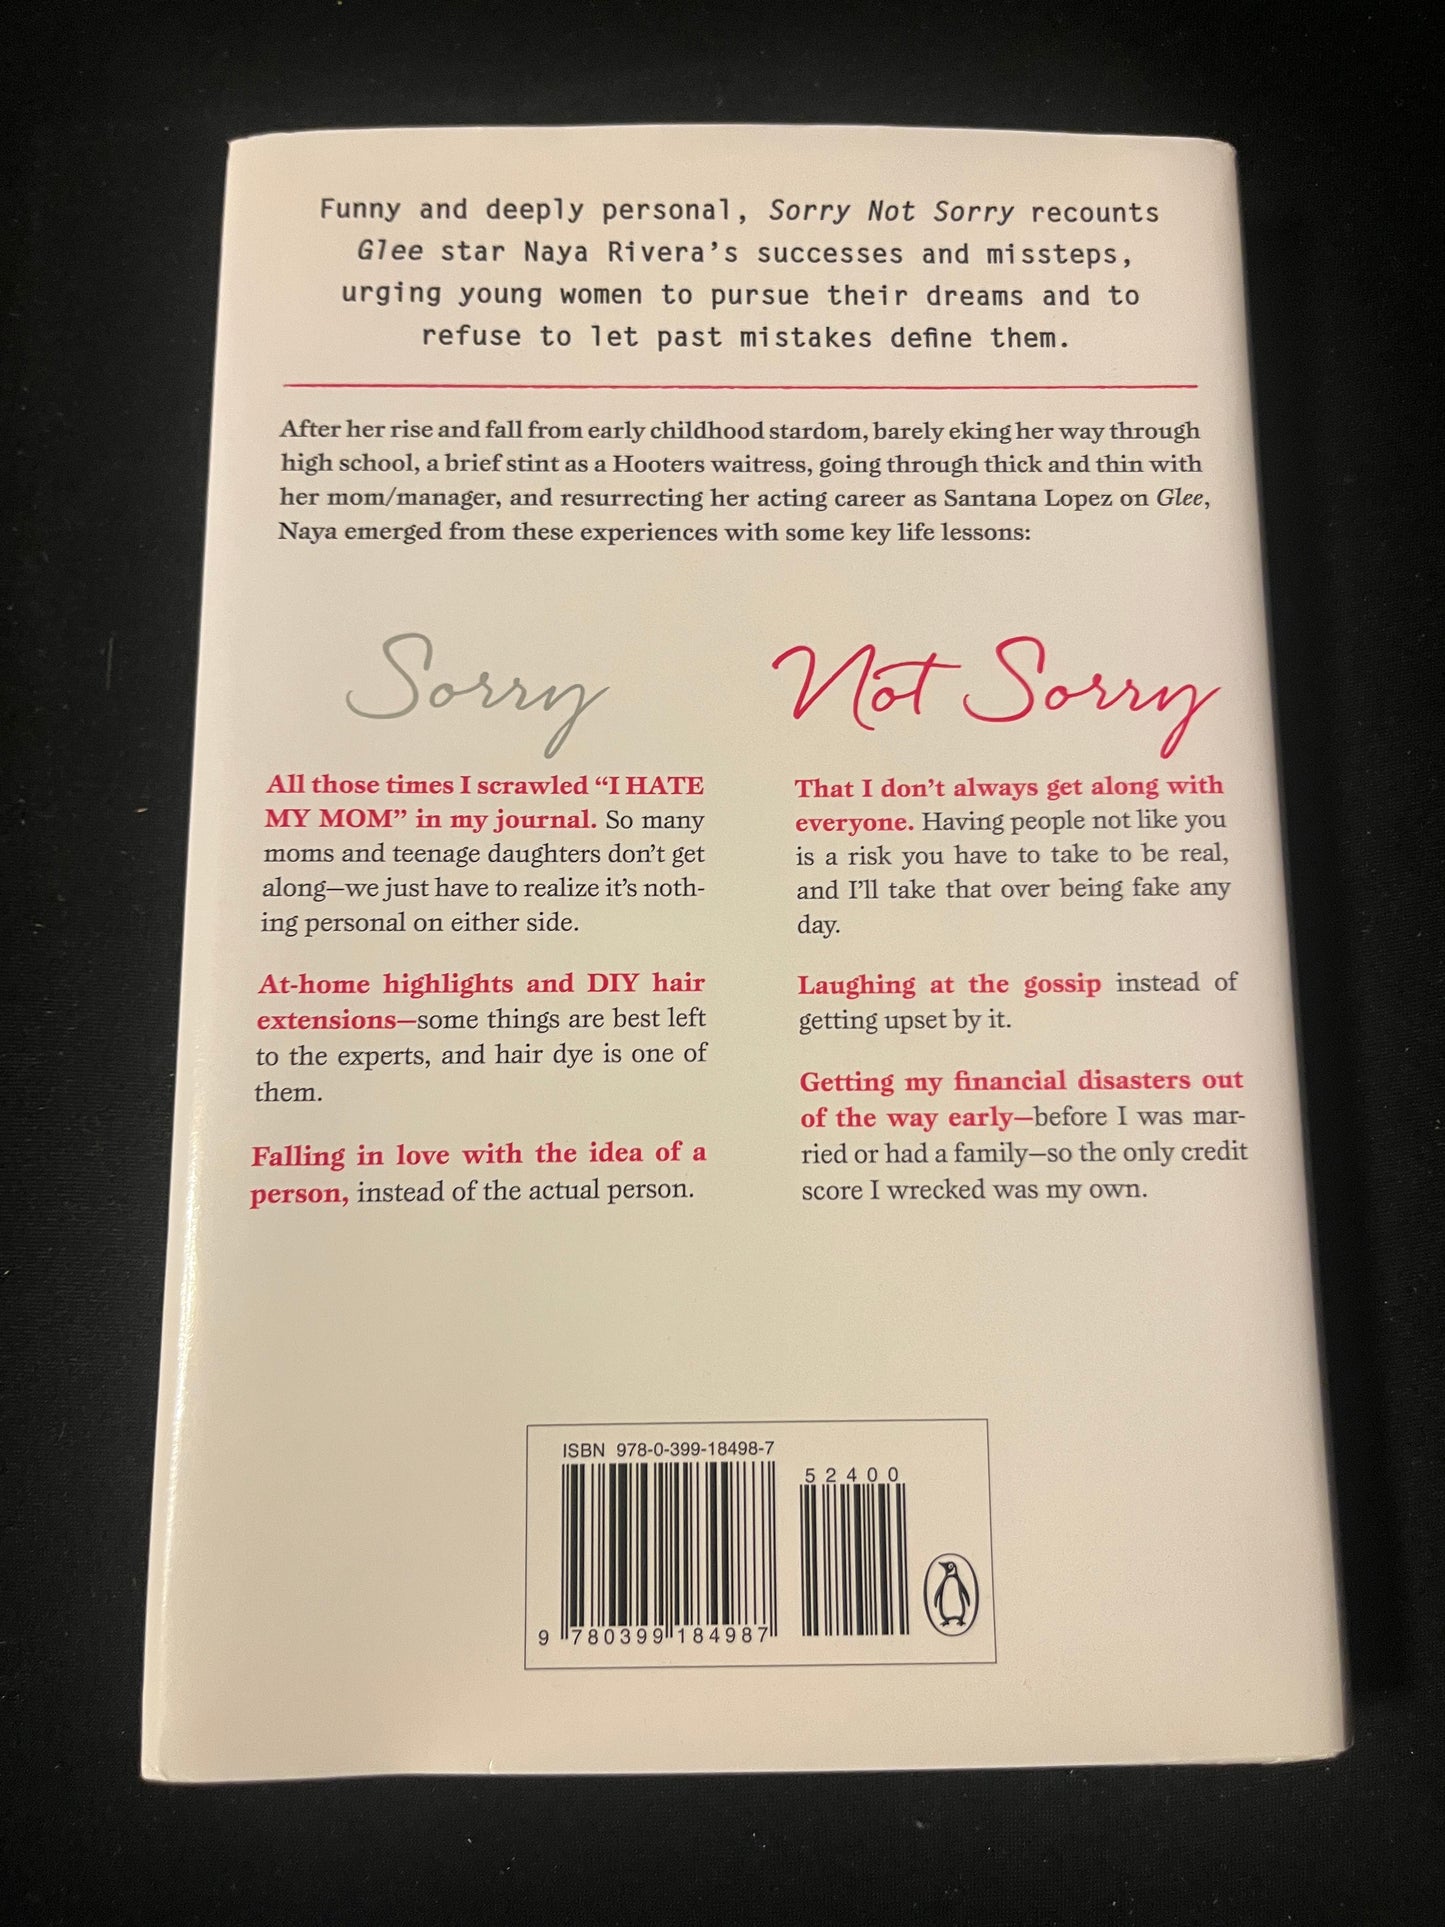 SORRY NOT SORRY: DREAMS, MISTAKES, AND GROWING UP by Naya Rivera